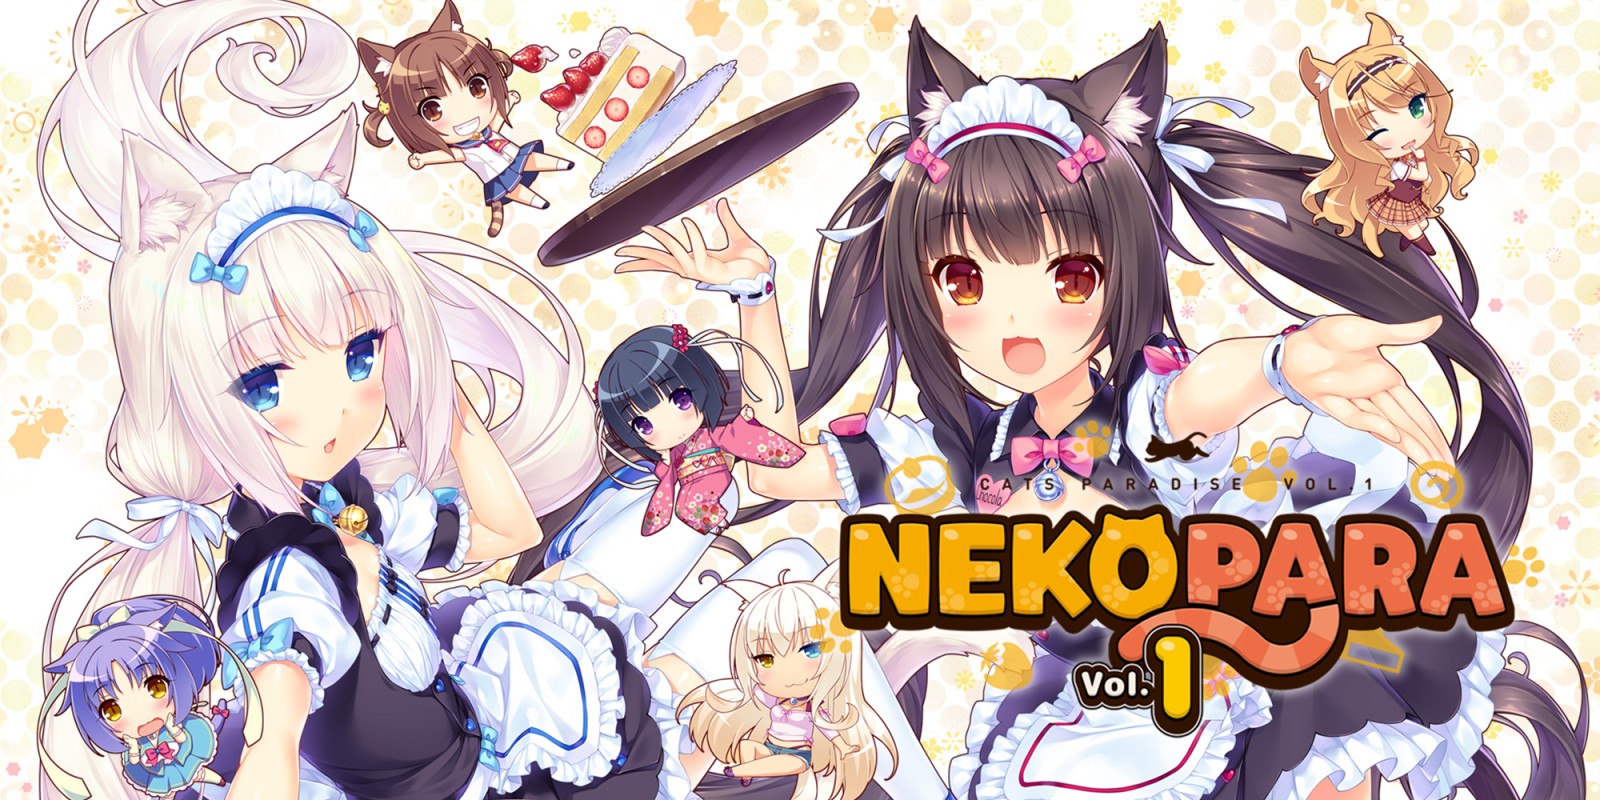 anusha vs recommends Is There Nudity In Nekopara